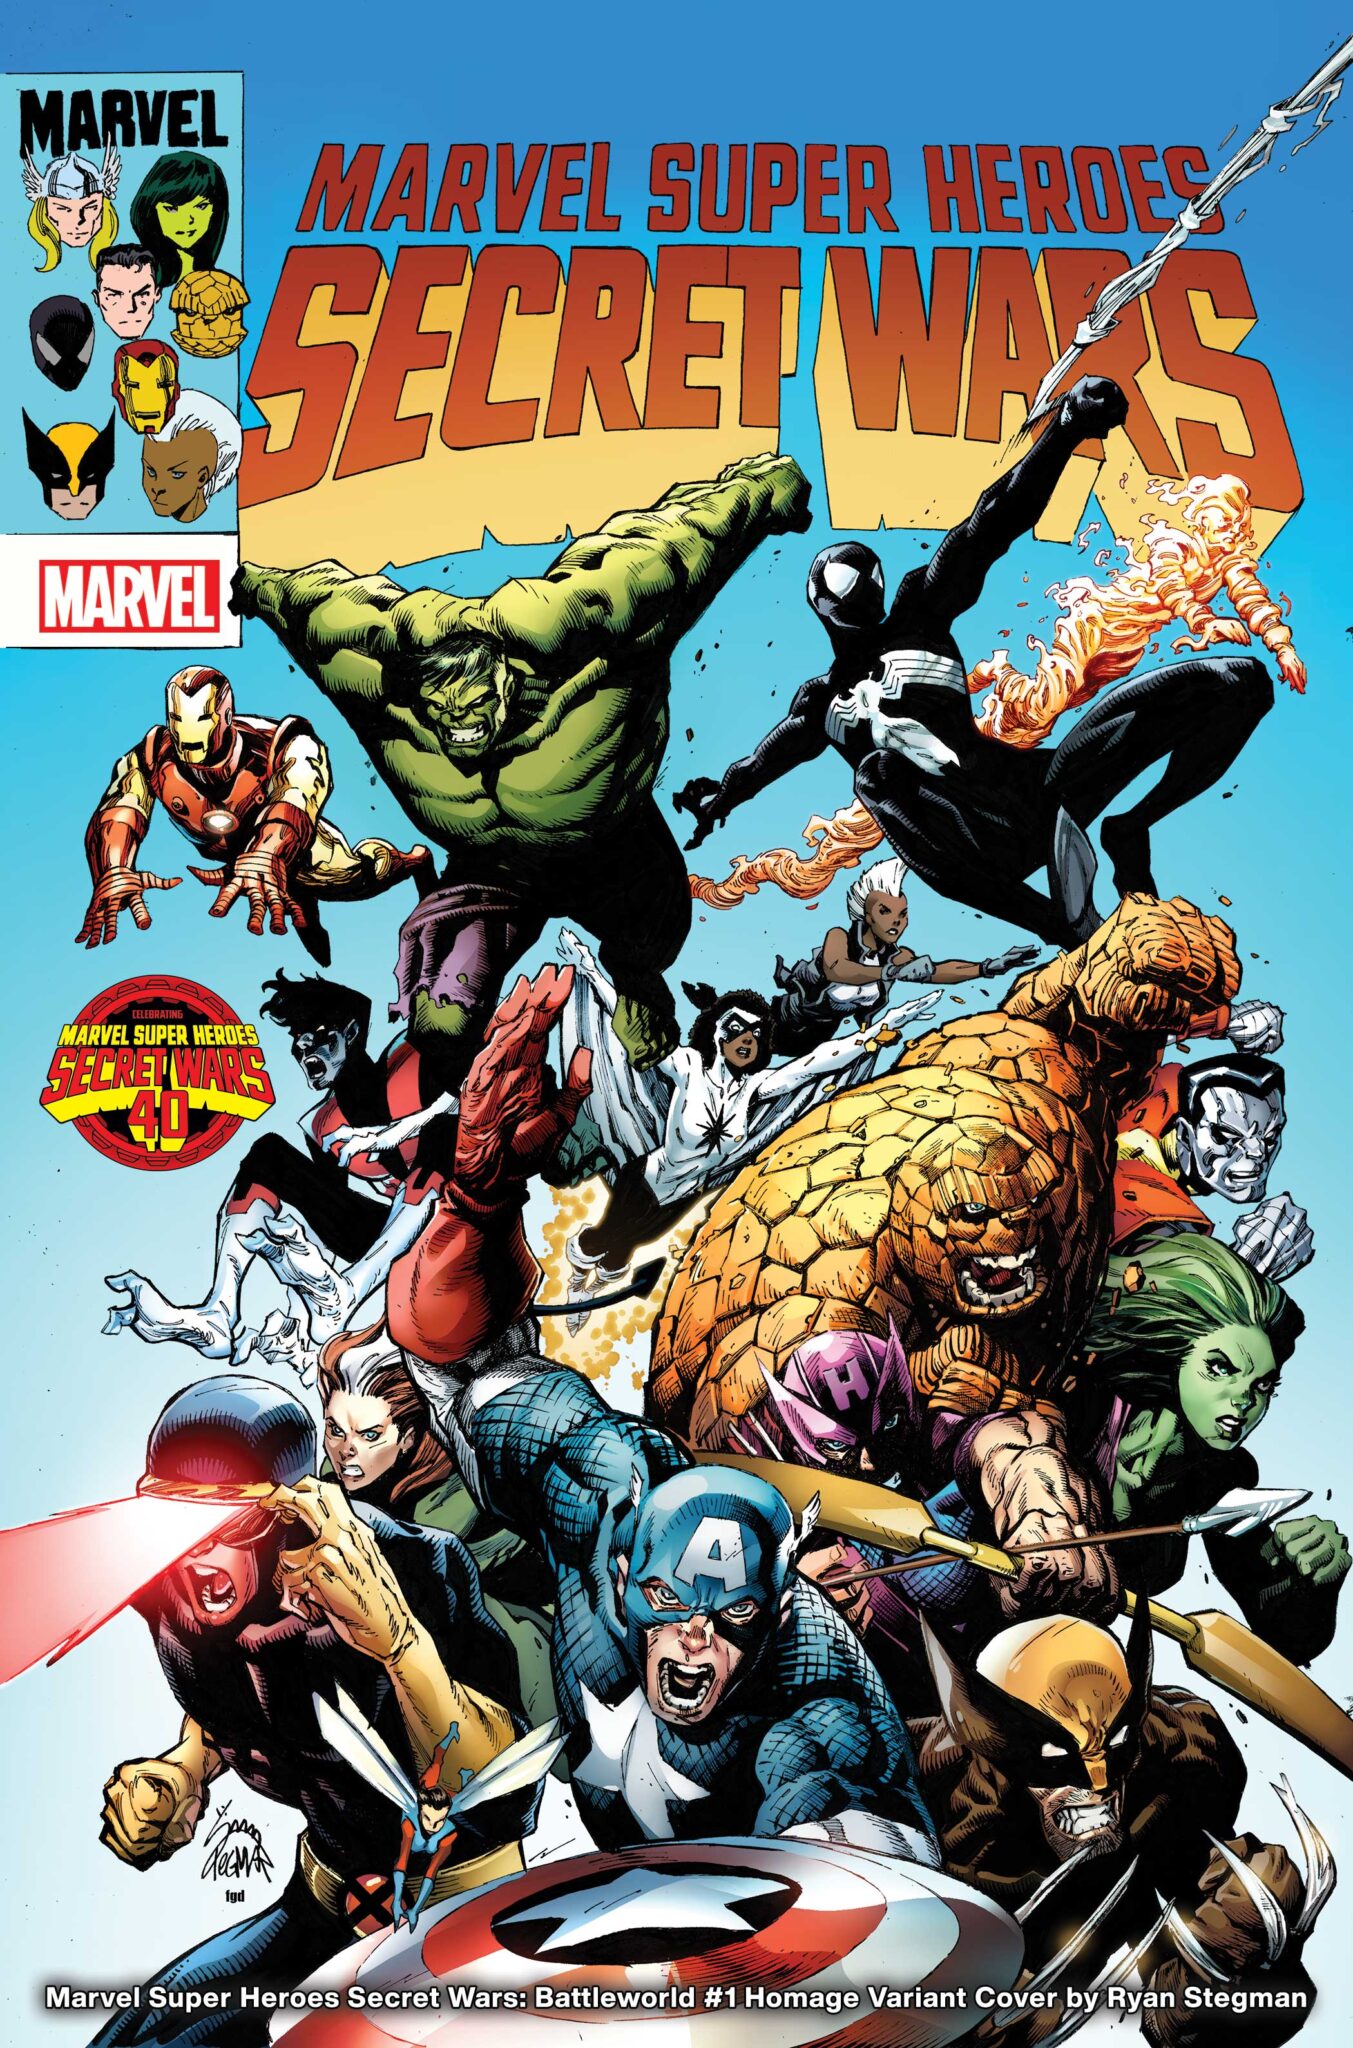 Tom DeFalco Returns To Marvel And Secret Wars For New Limited Series